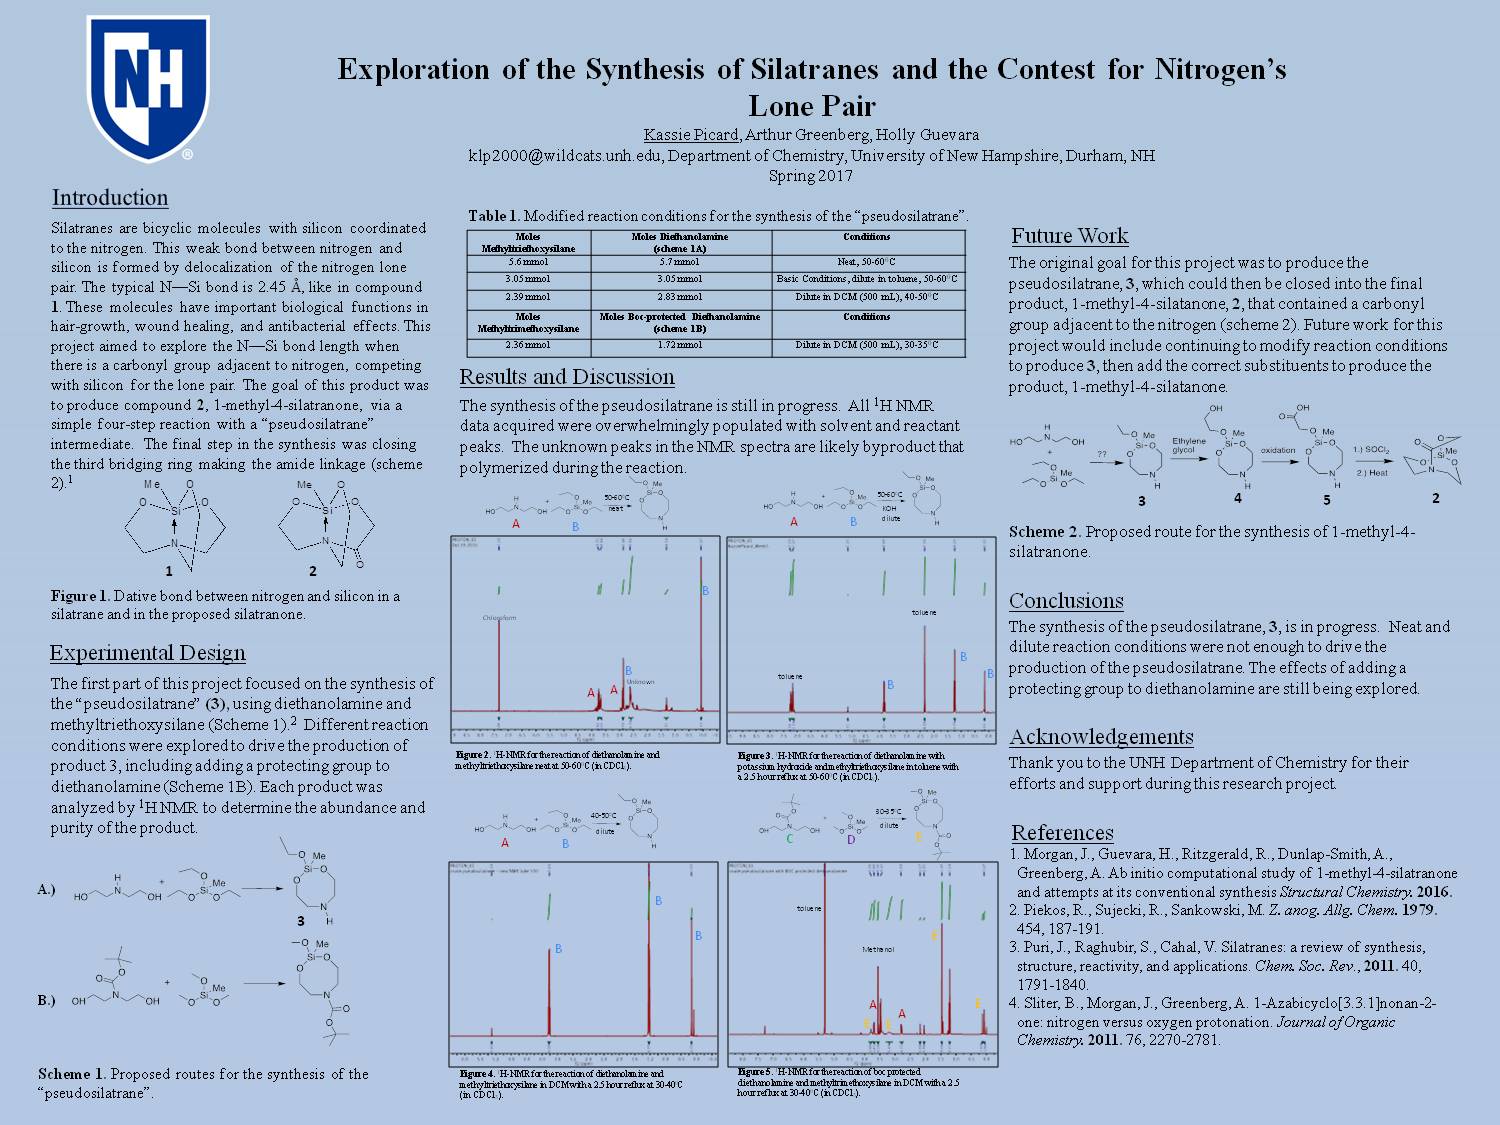 Exploration Of The Synthesis Of Silatranes And The Contest For Nitrogen’S  Lone Pair  by klp2000